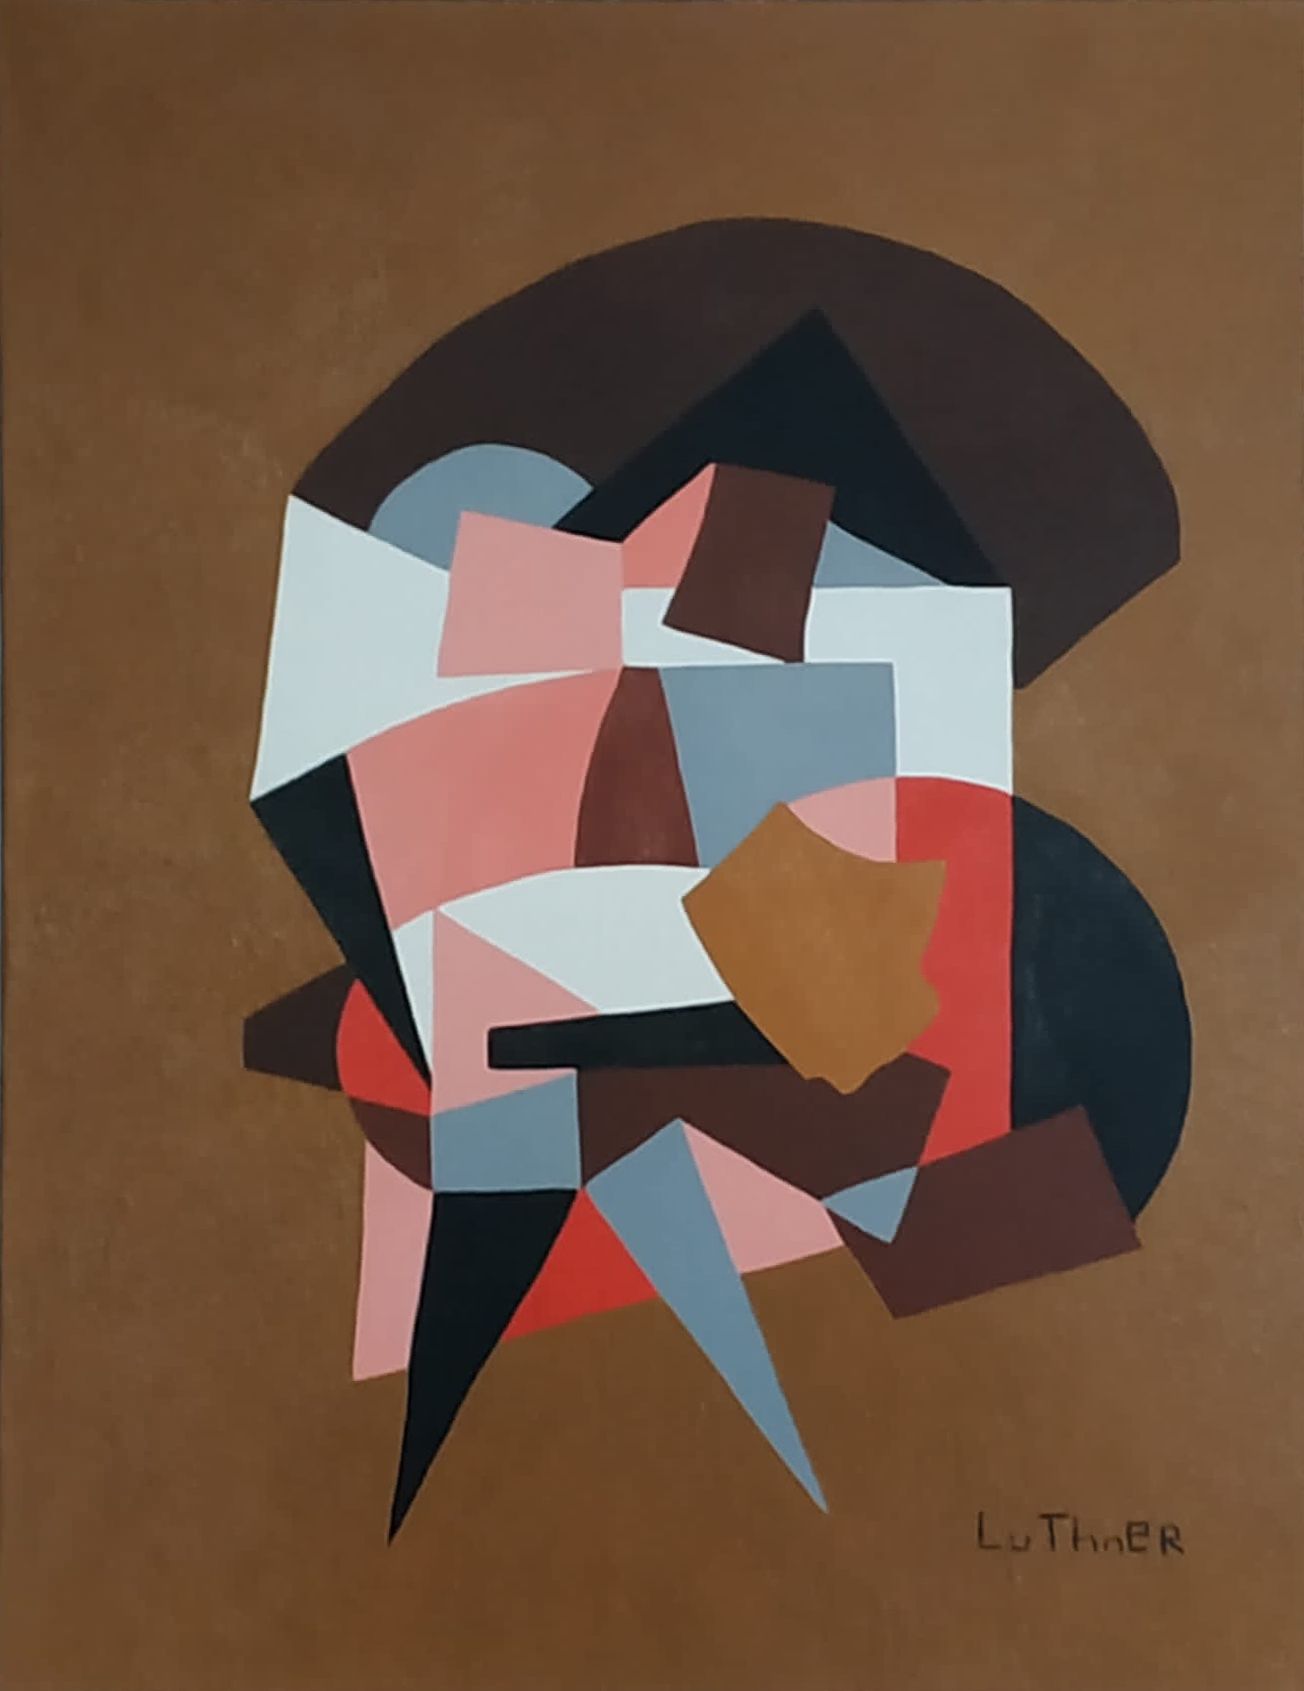 Johann Luthner Man with a pipe
Oil on canvas, signed lower right
65 x 50 cm